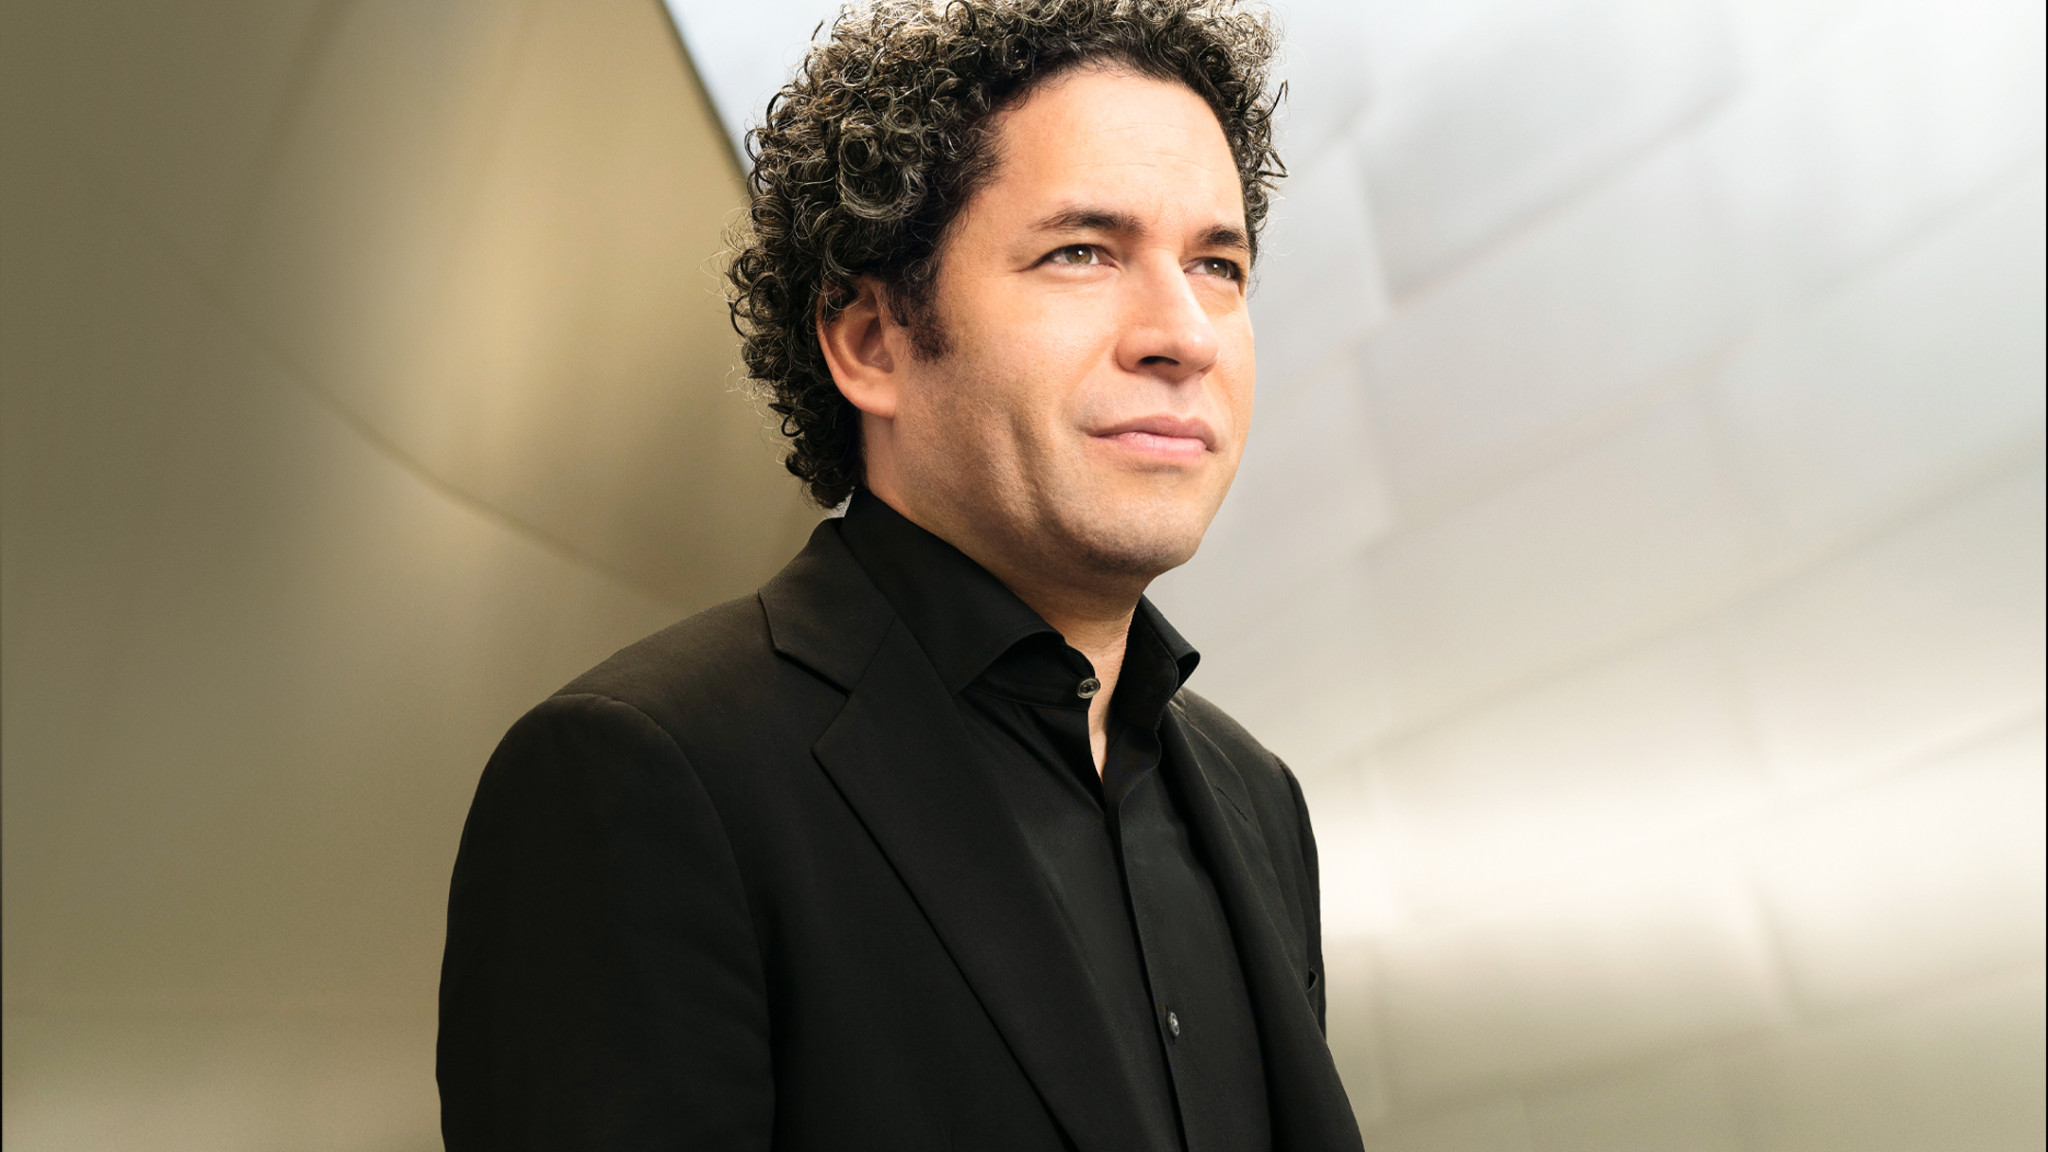 Available in Dolby Atmos® - Dudamel & the LA Phil record Mahler’s 8th symphony